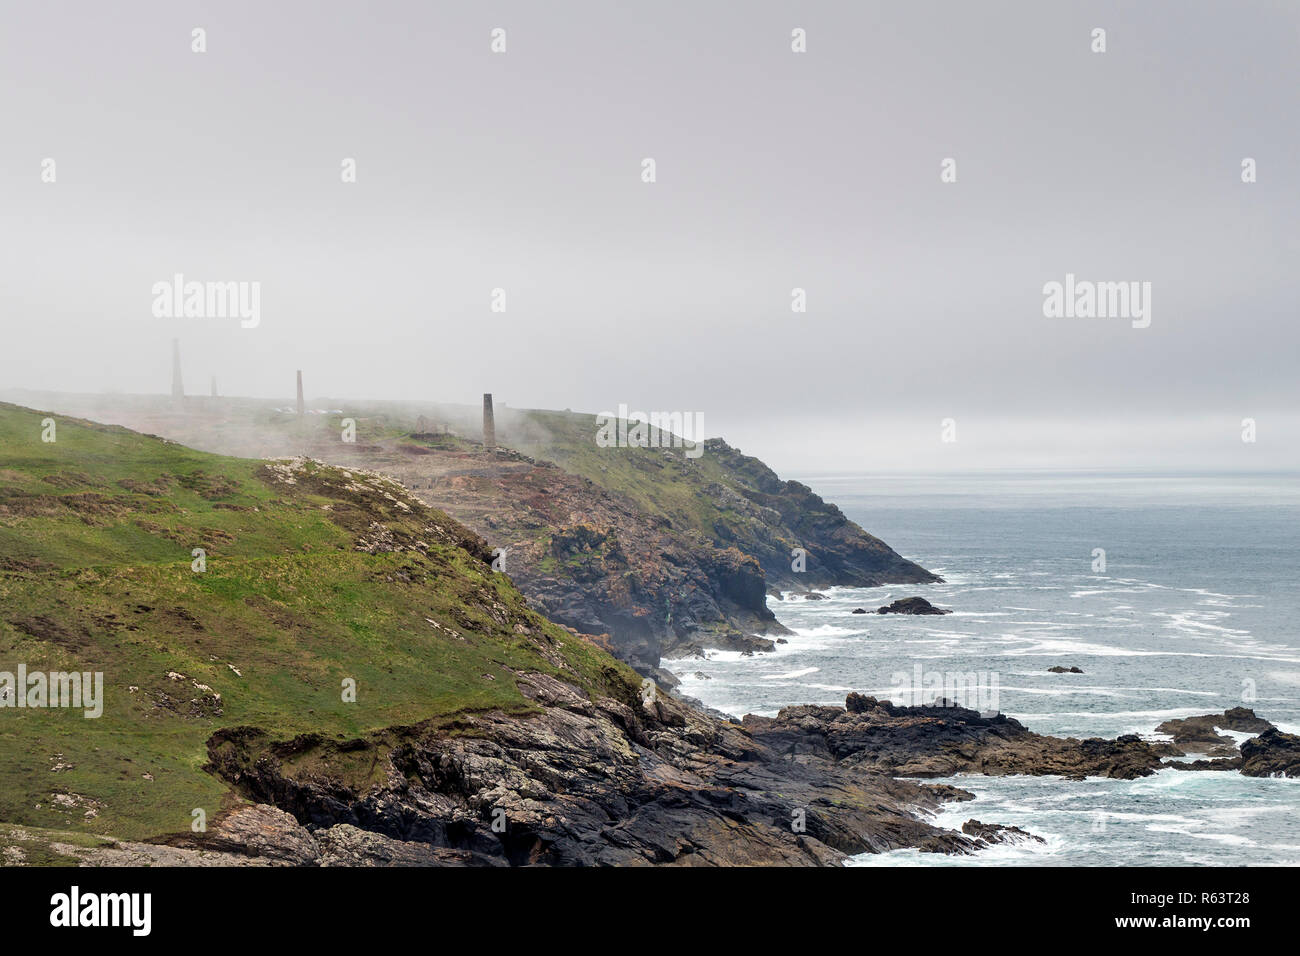 Mist Swirling Around the Chimneys and Spoil Heaps of the Abandoned Levant Mines, Botallack, St Just, Cornwall, UK Stock Photo